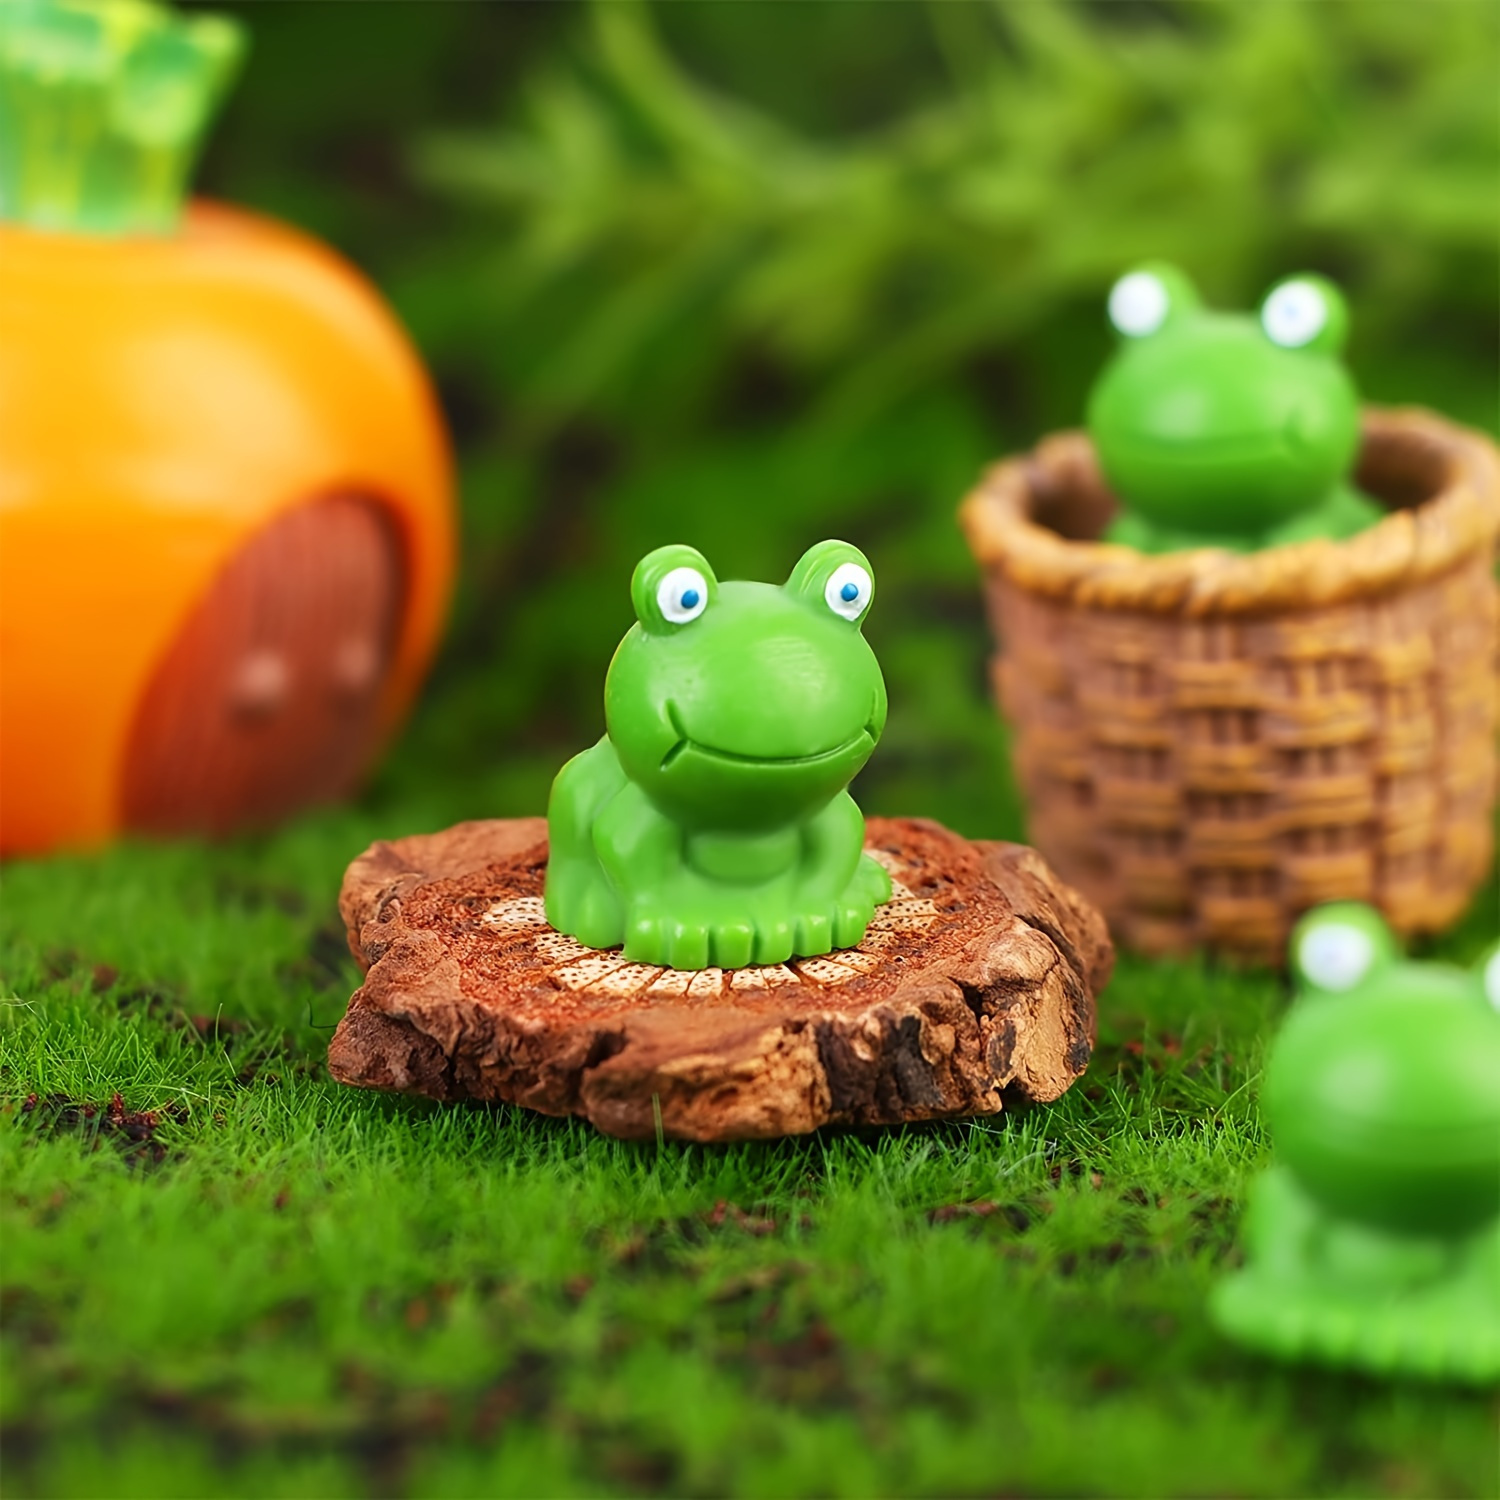  Mini Frogs 200 Pack, Tiny Cute Frog Figurines, Green Frog Resin  Miniature Figurines for DIY Terrarium Crafts Miniature Moss Landscape Fairy  Garden Home Decoration (100Pcs, White) : Patio, Lawn & Garden